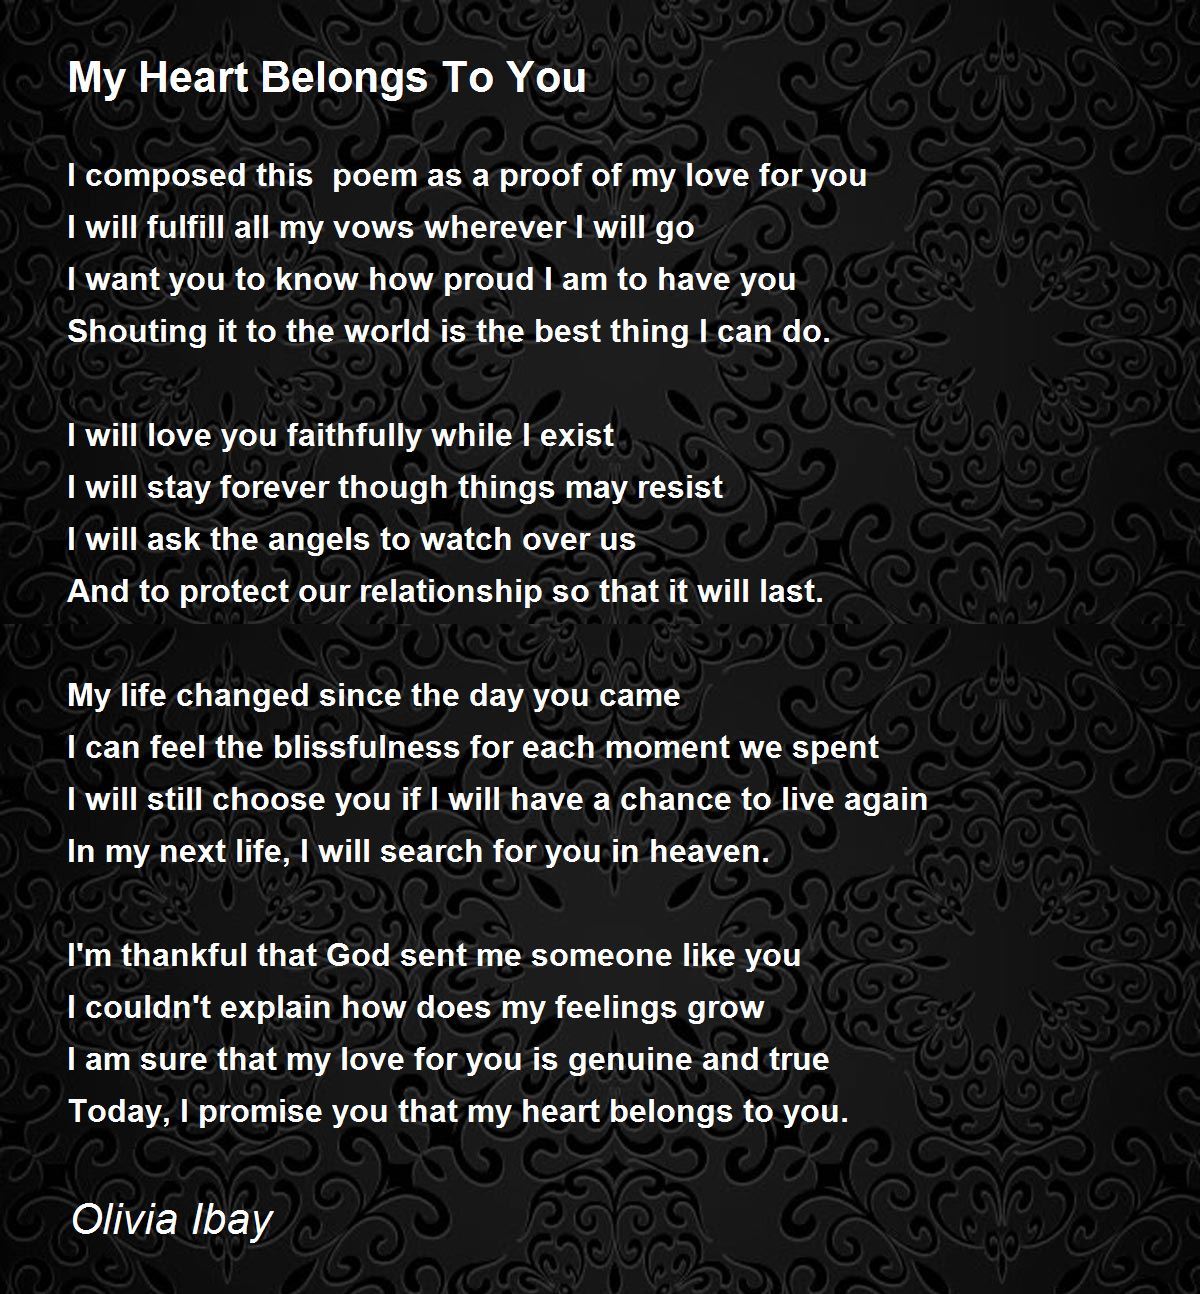 https://img.poemhunter.com/i/poem_images/202/my-heart-belongs-to-you-2.jpg